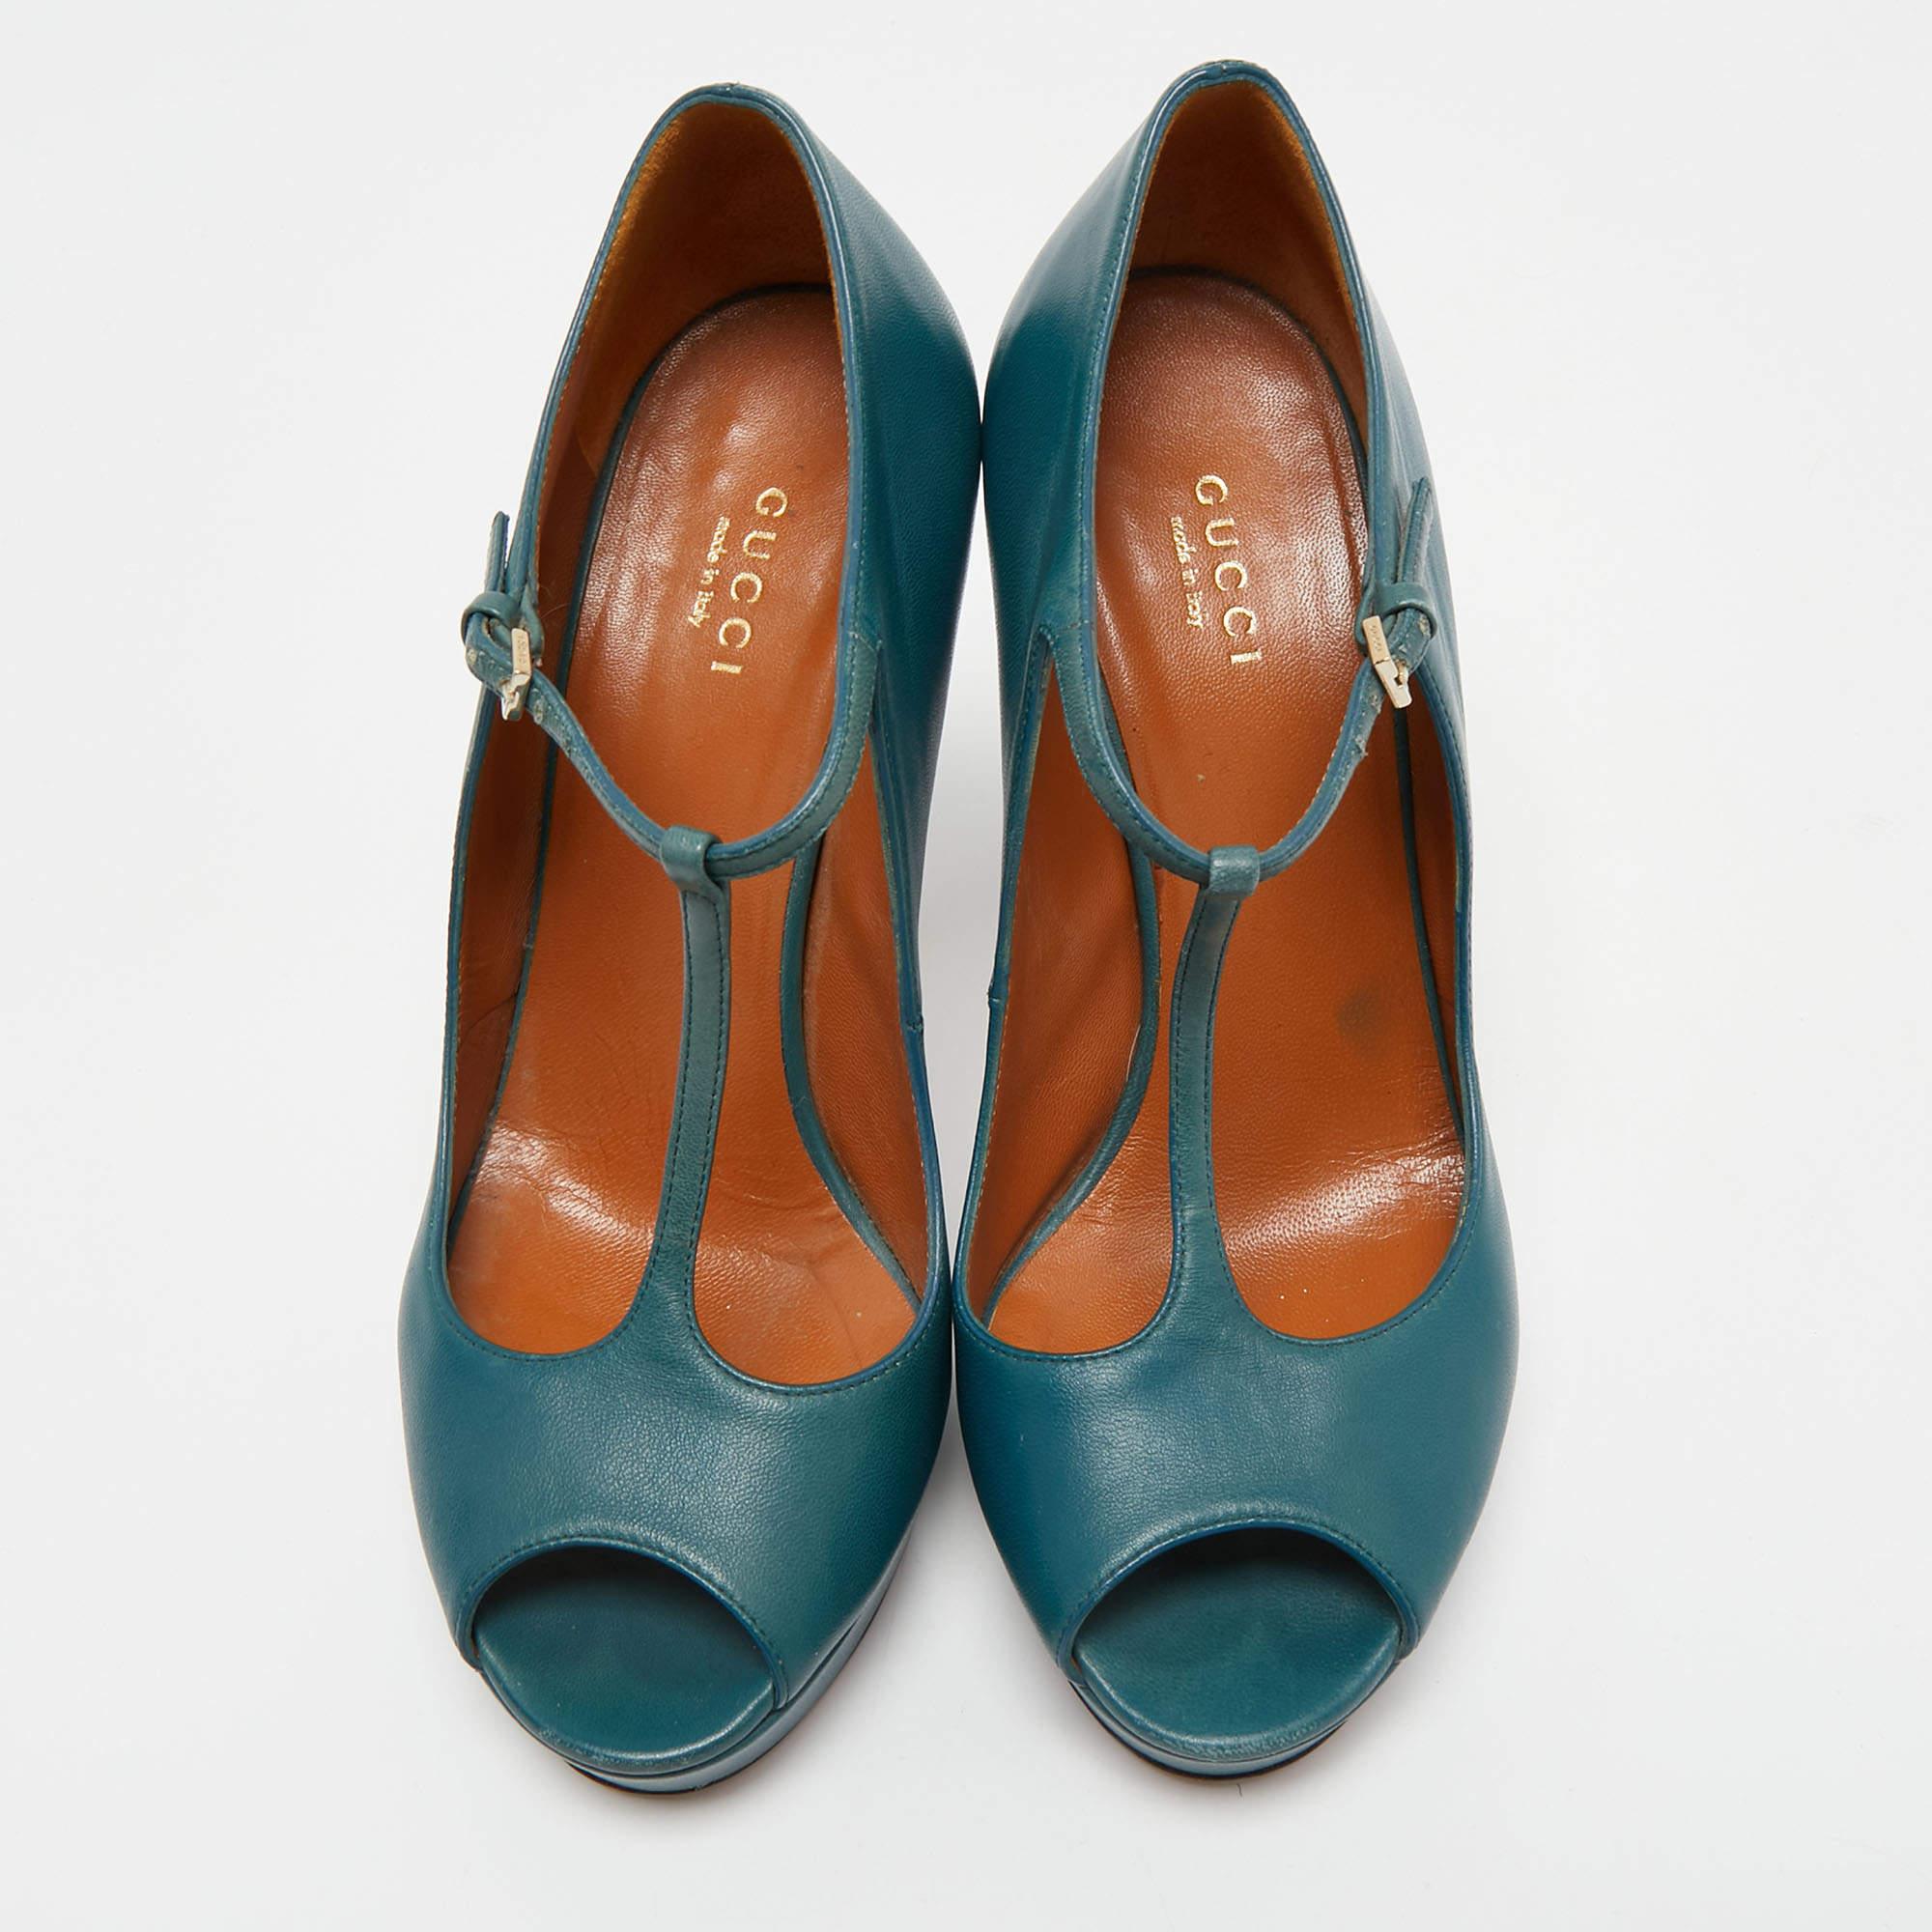 Flaunt elegance and style with this pair of leather pumps. Gucci has made these T-strap betty pumps with platforms and 12cm heels. This classy teal pair is suitable for work, parties, or even day events.

